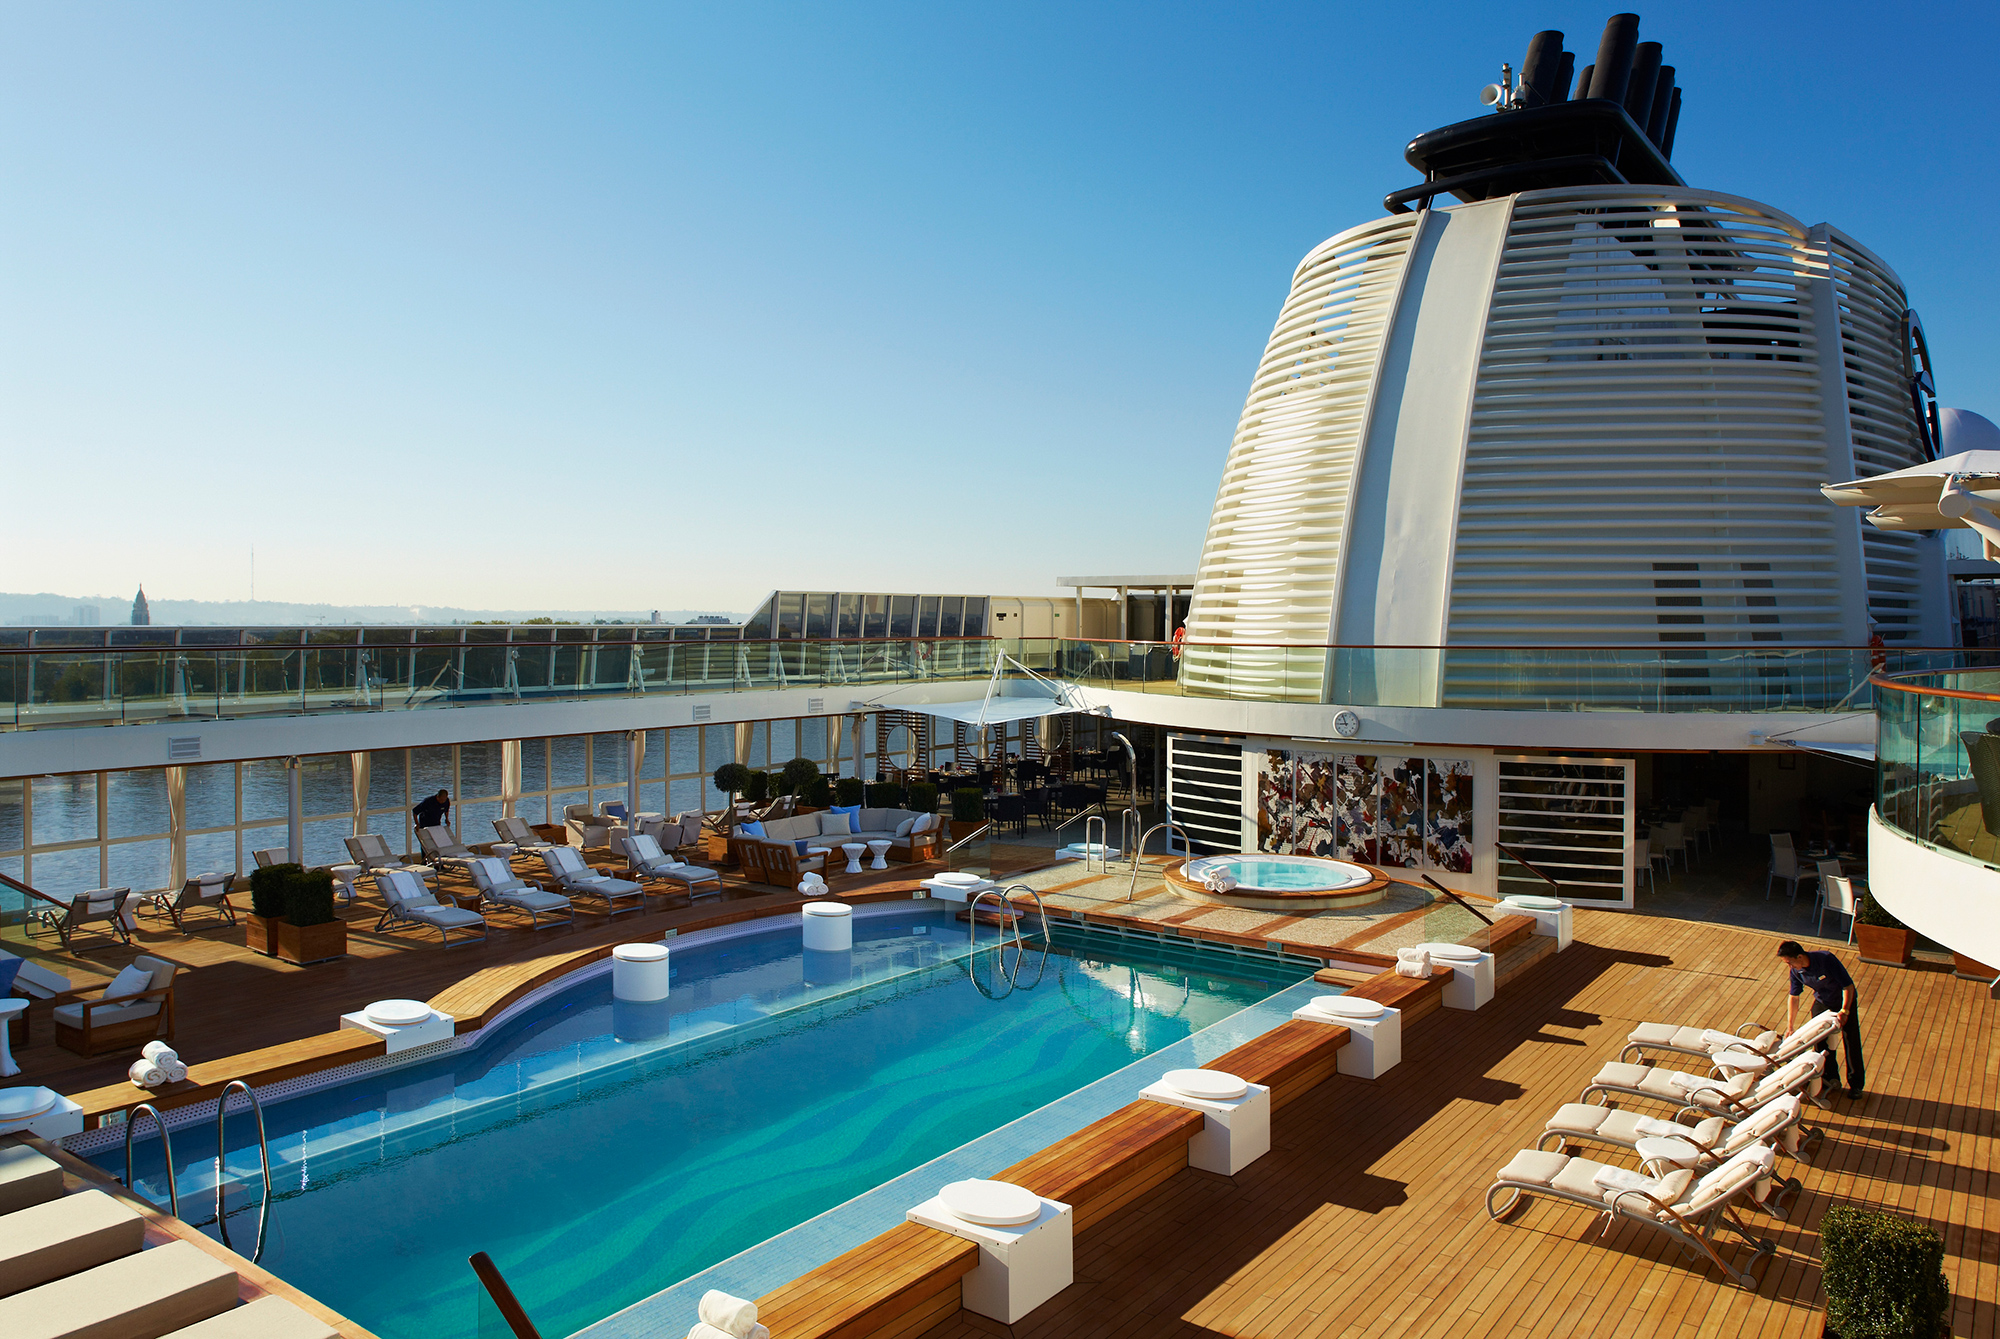 The pool deck on The World